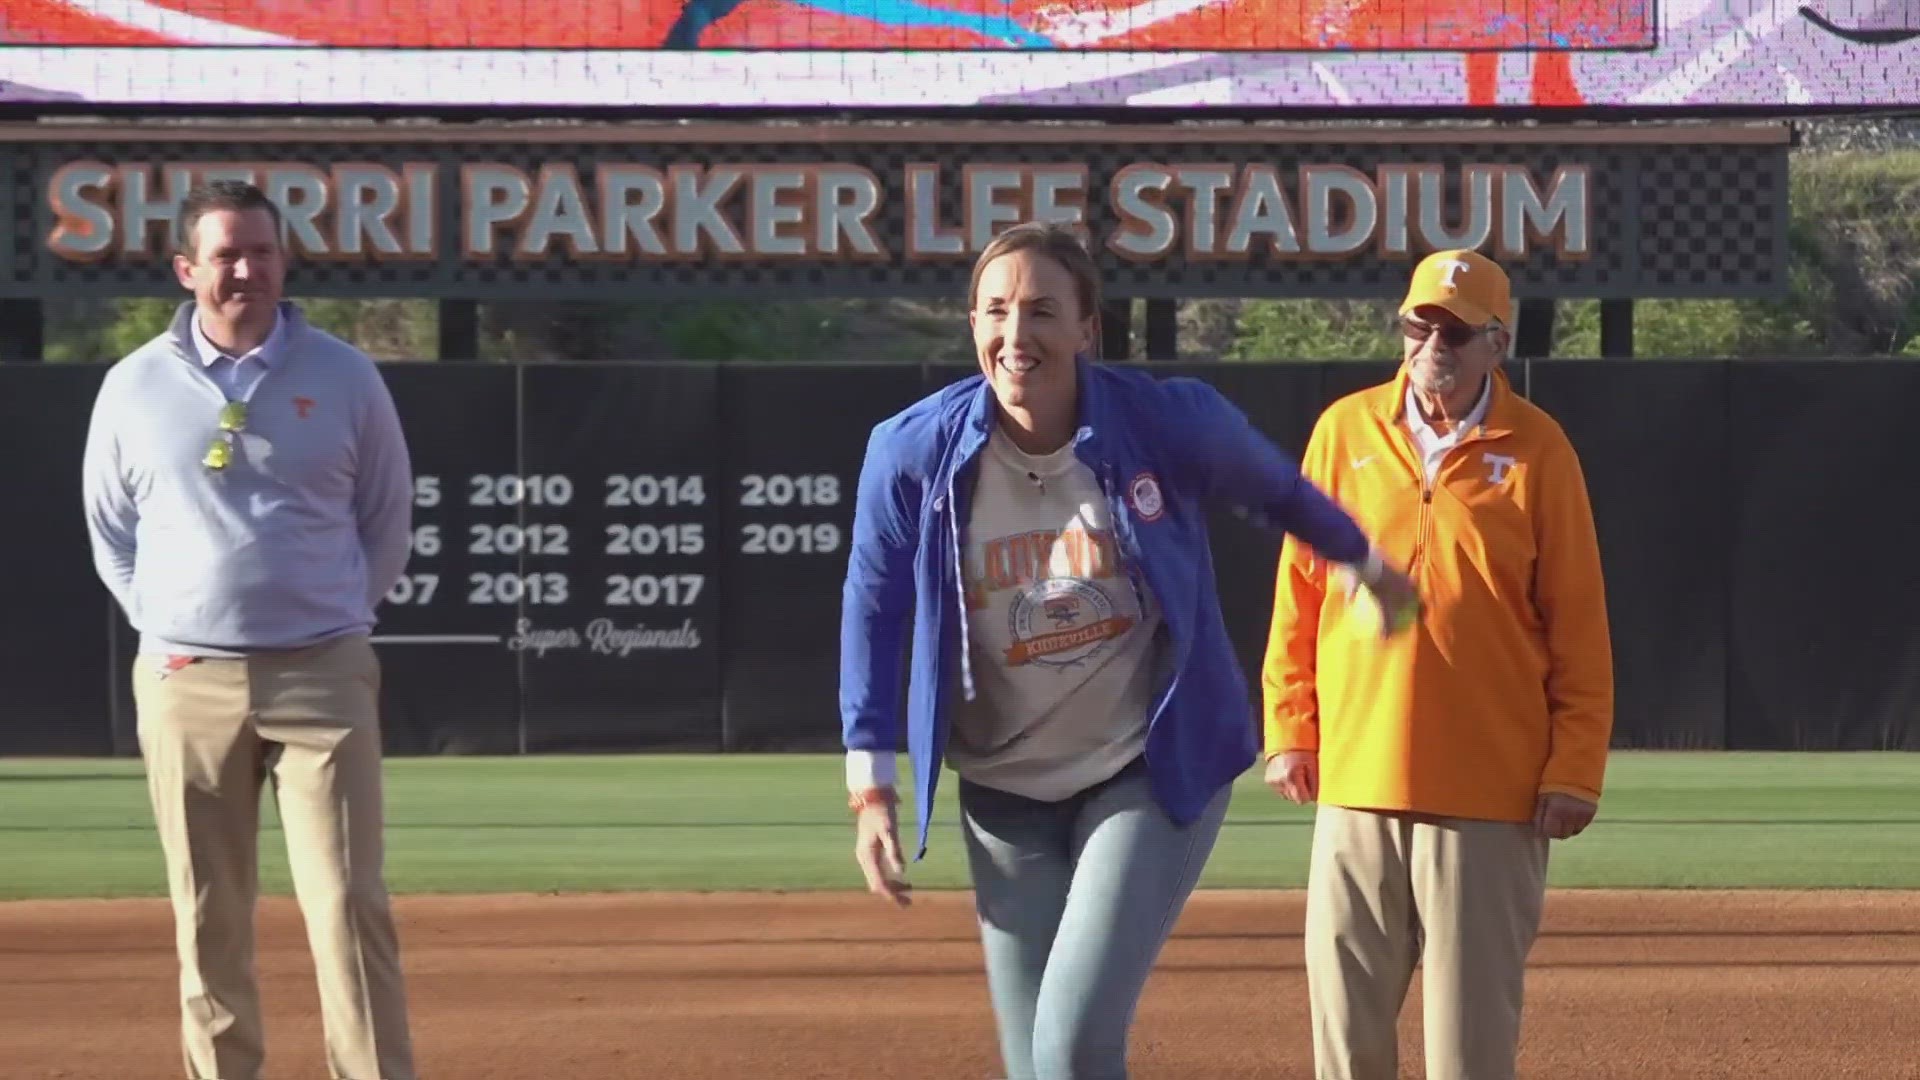 The former Lady Vol pitcher and Olympian announced her retirement in February. Abbott threw out the first pitch prior to Tennessee's game against Florida on Monday.